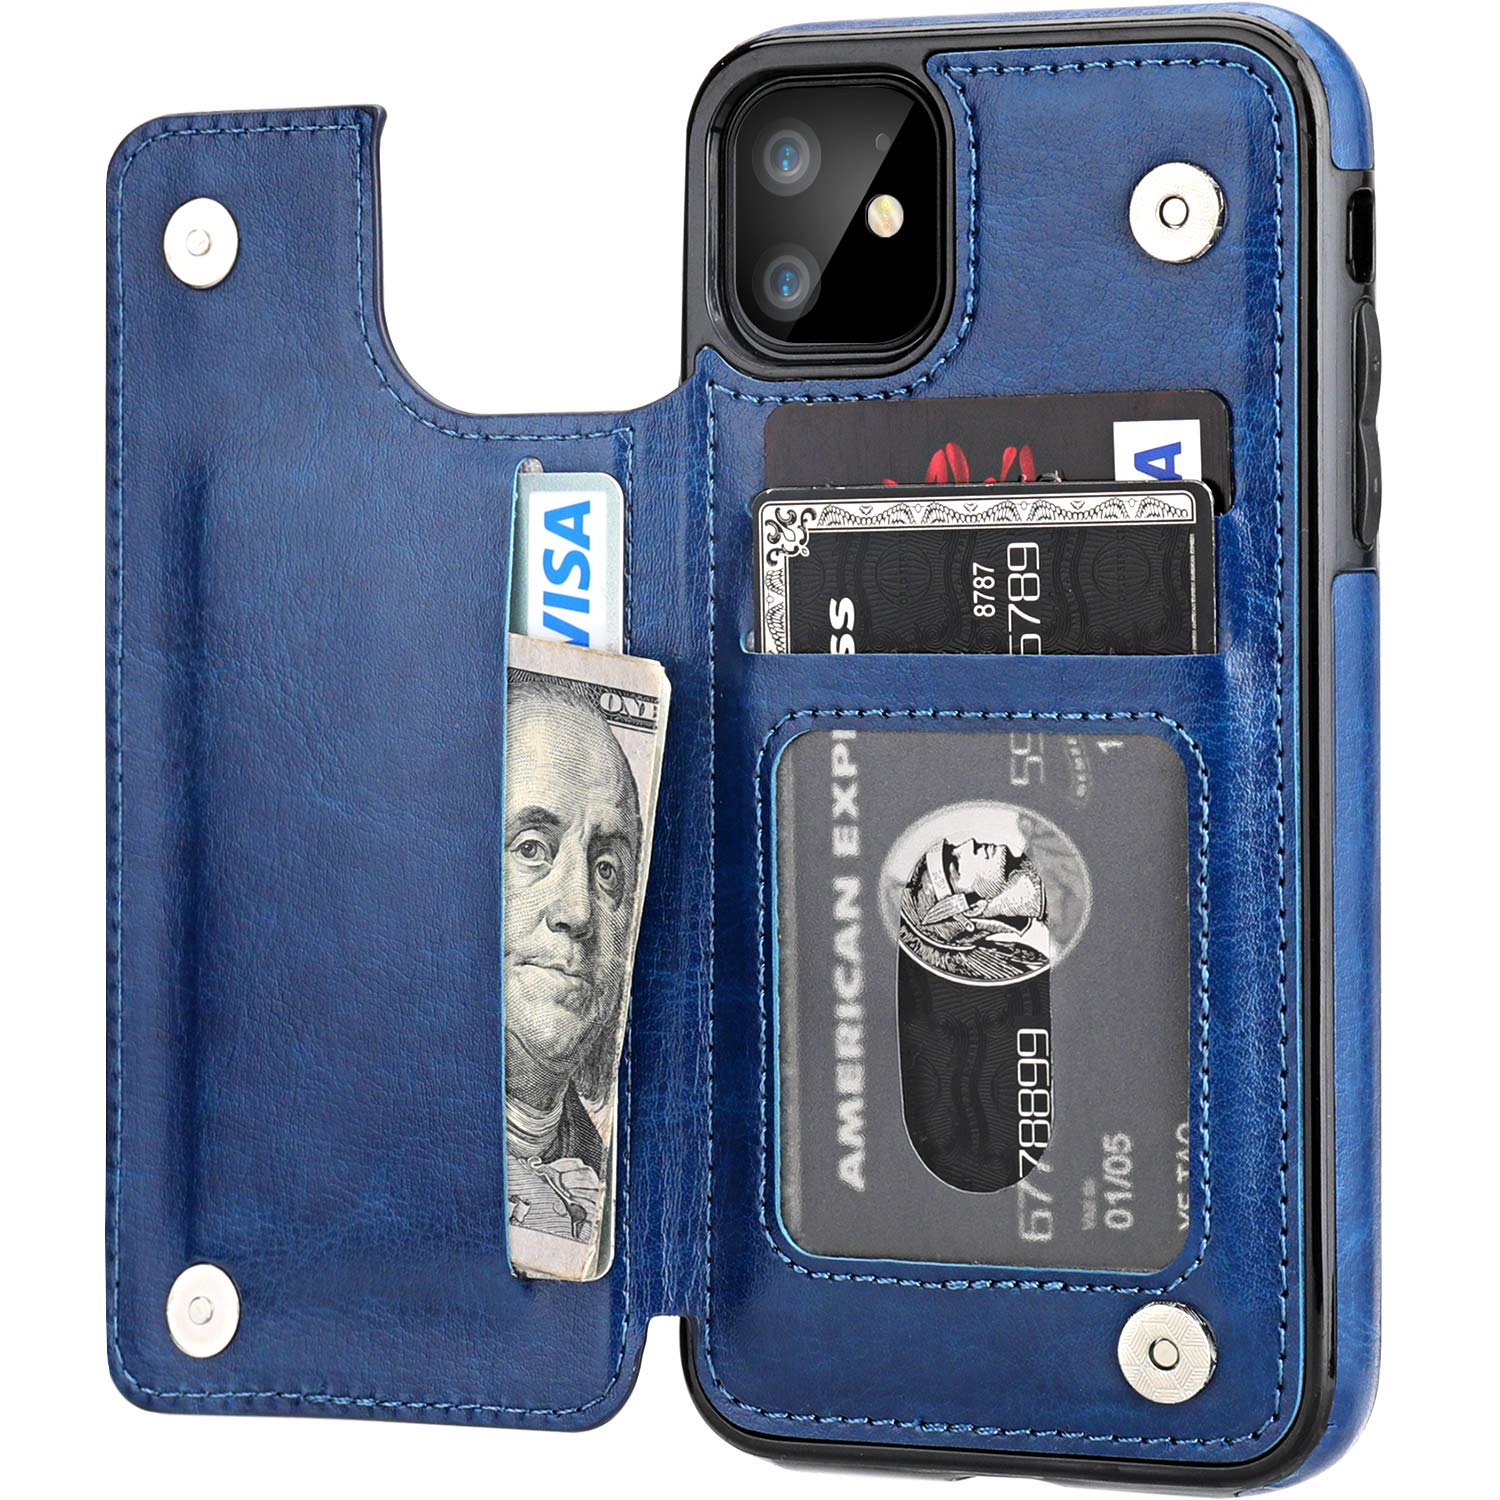 iPhone 11 Wallet Case with Card Holder,OT ONETOP PU Leather Kickstand Card Slots Case,Double Magnetic Clasp and Durable Shockproof Cover for iPhone 11 6.1 Inch(Blue)